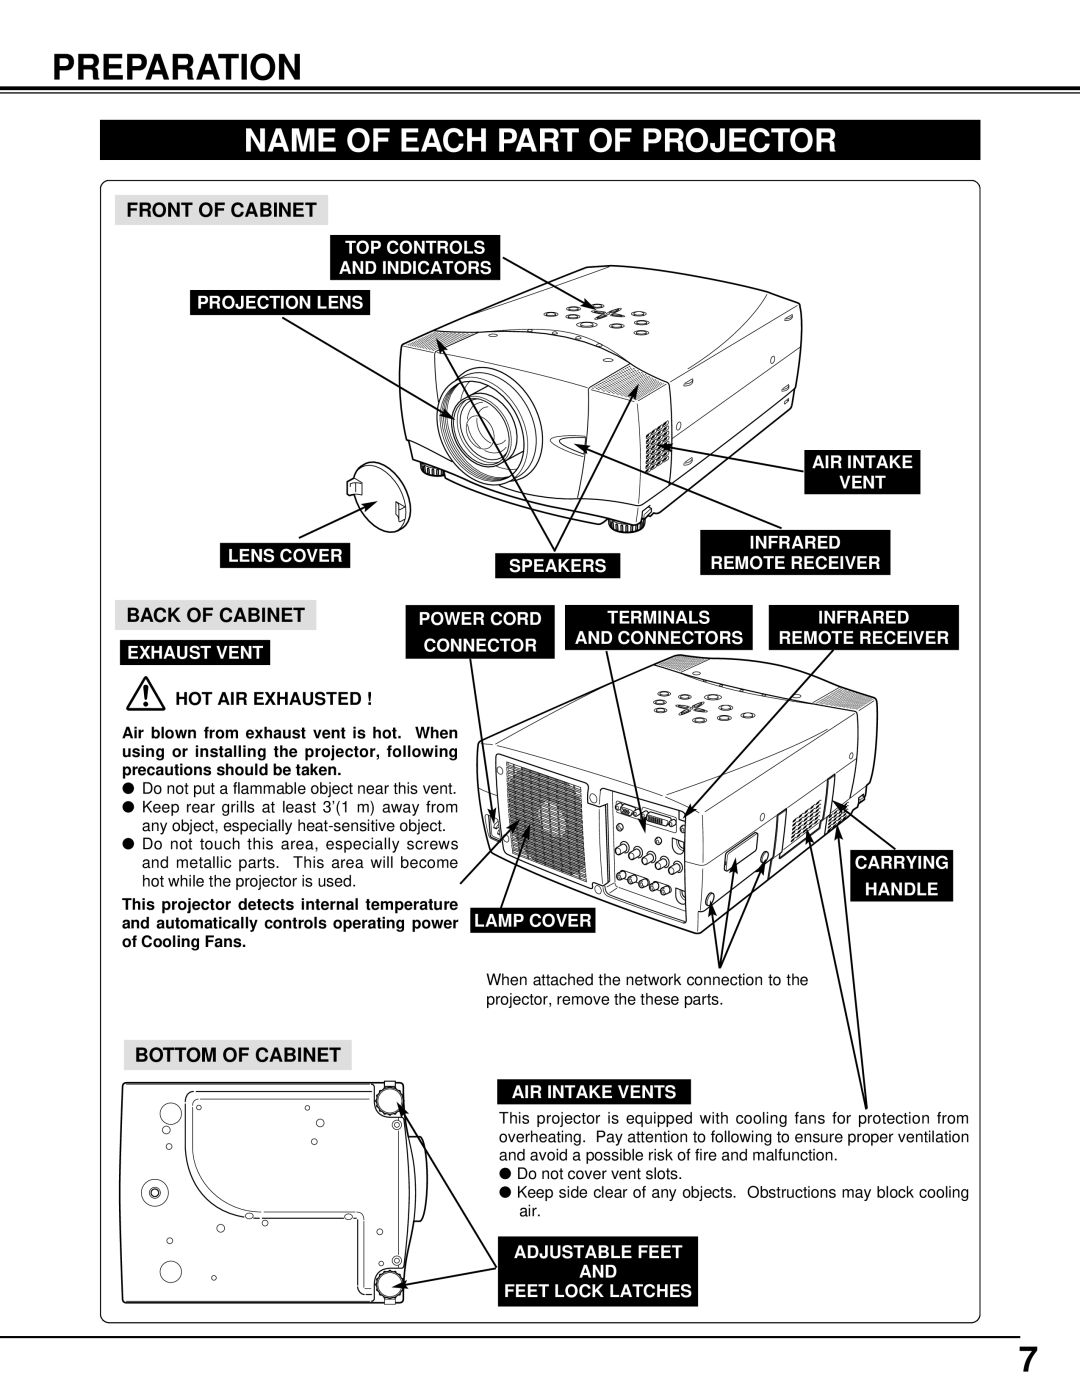 BOXLIGHT CINEMA 20HD Preparation, Name Of Each Part Of Projector, Front Of Cabinet, Back Of Cabinet, Bottom Of Cabinet 